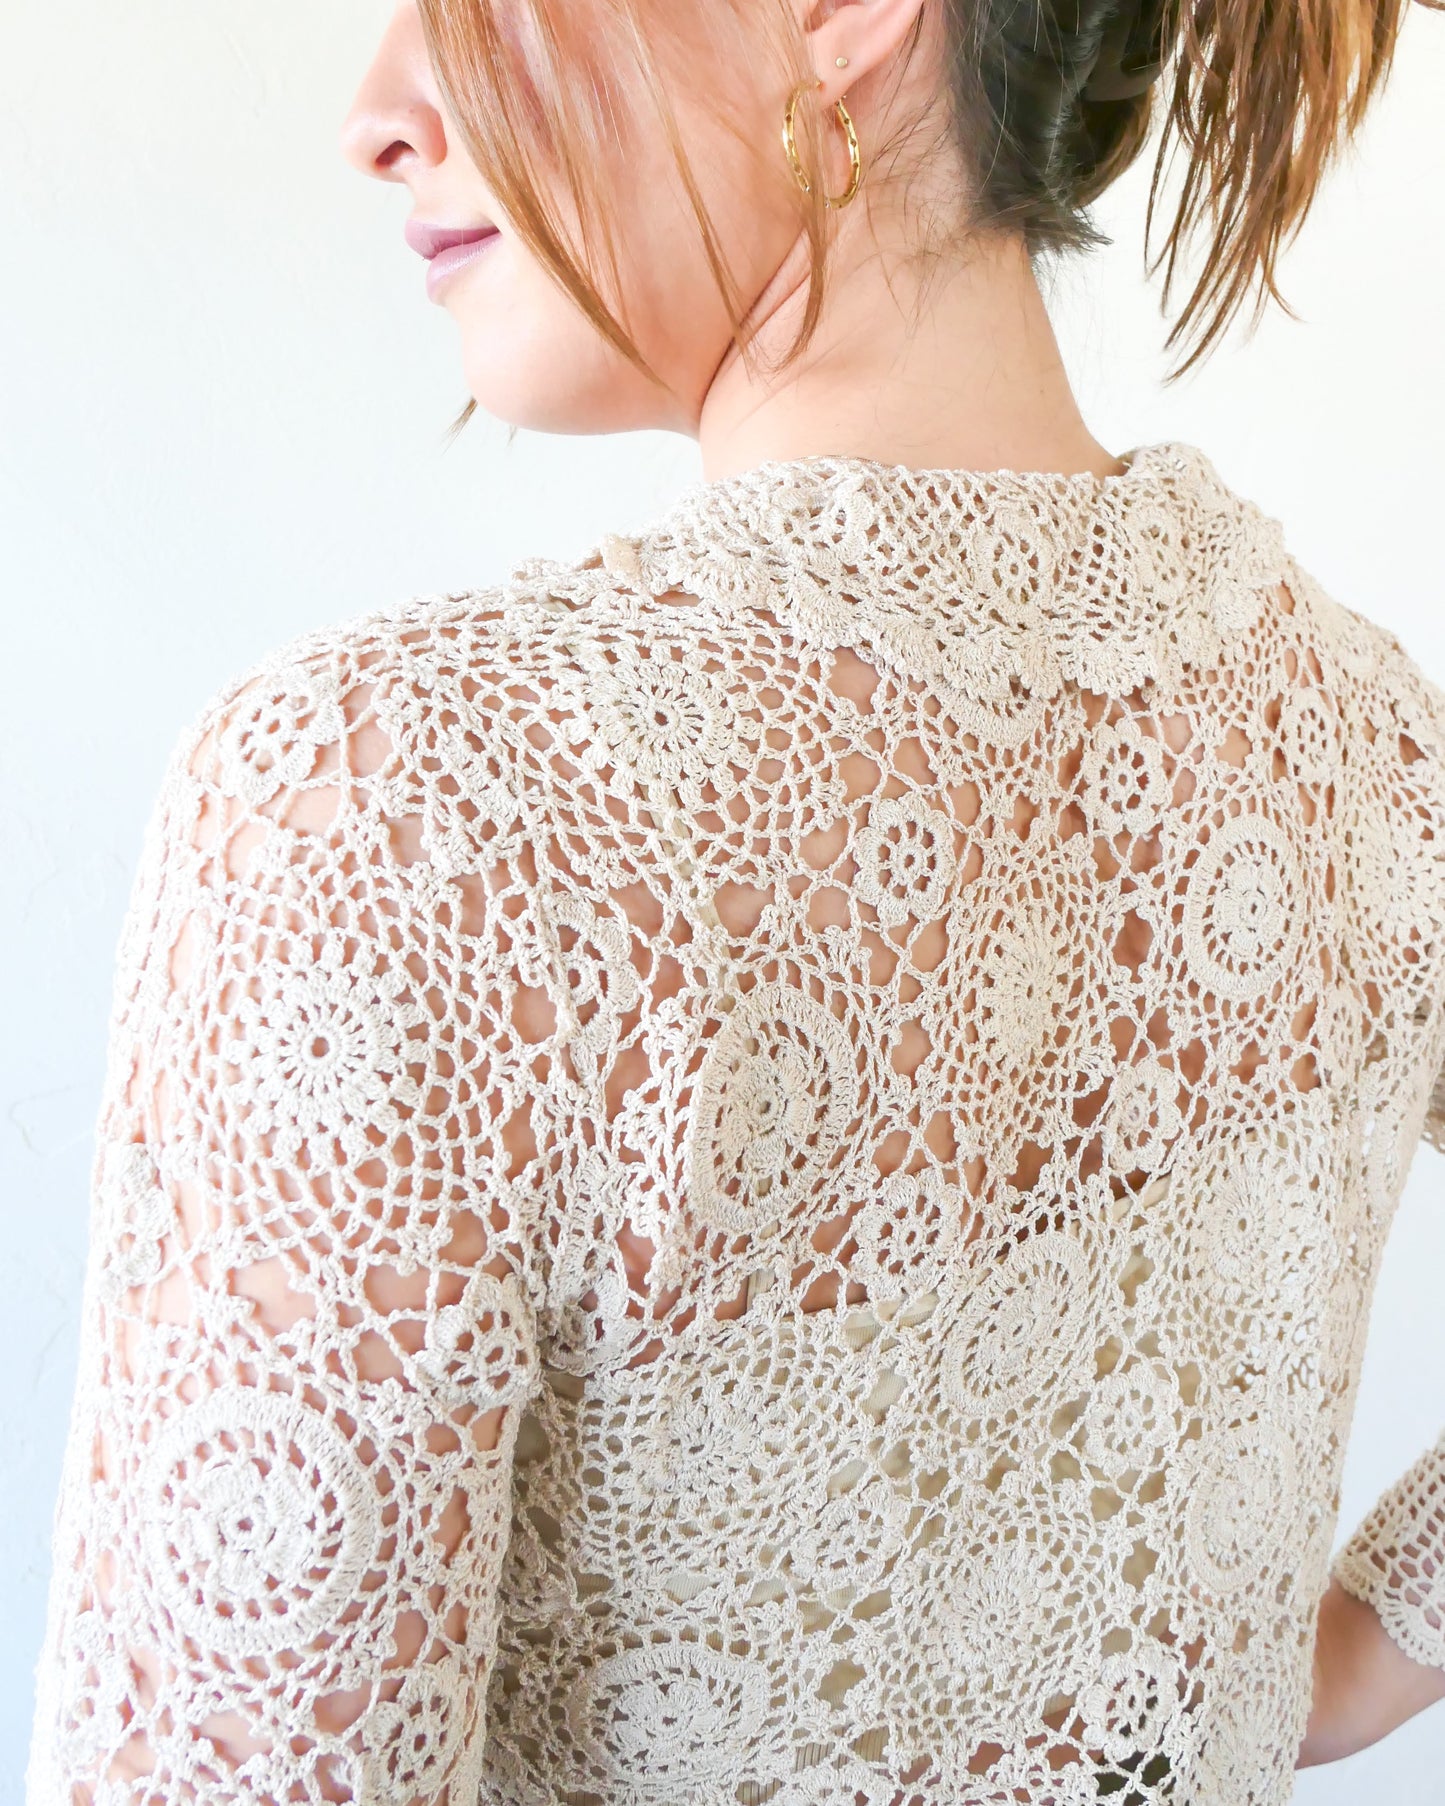 Closeup of back side view of collar and upper back. A versatile and boho chic hand crocheted cropped cardigan sweater with a unique, repeating kaleidoscope-like floral pattern throughout. Dress it down with a pair of jeans and sandals, or dress it up with neutral colored wide leg pants, heels, and a pair of vintage dangly earrings.